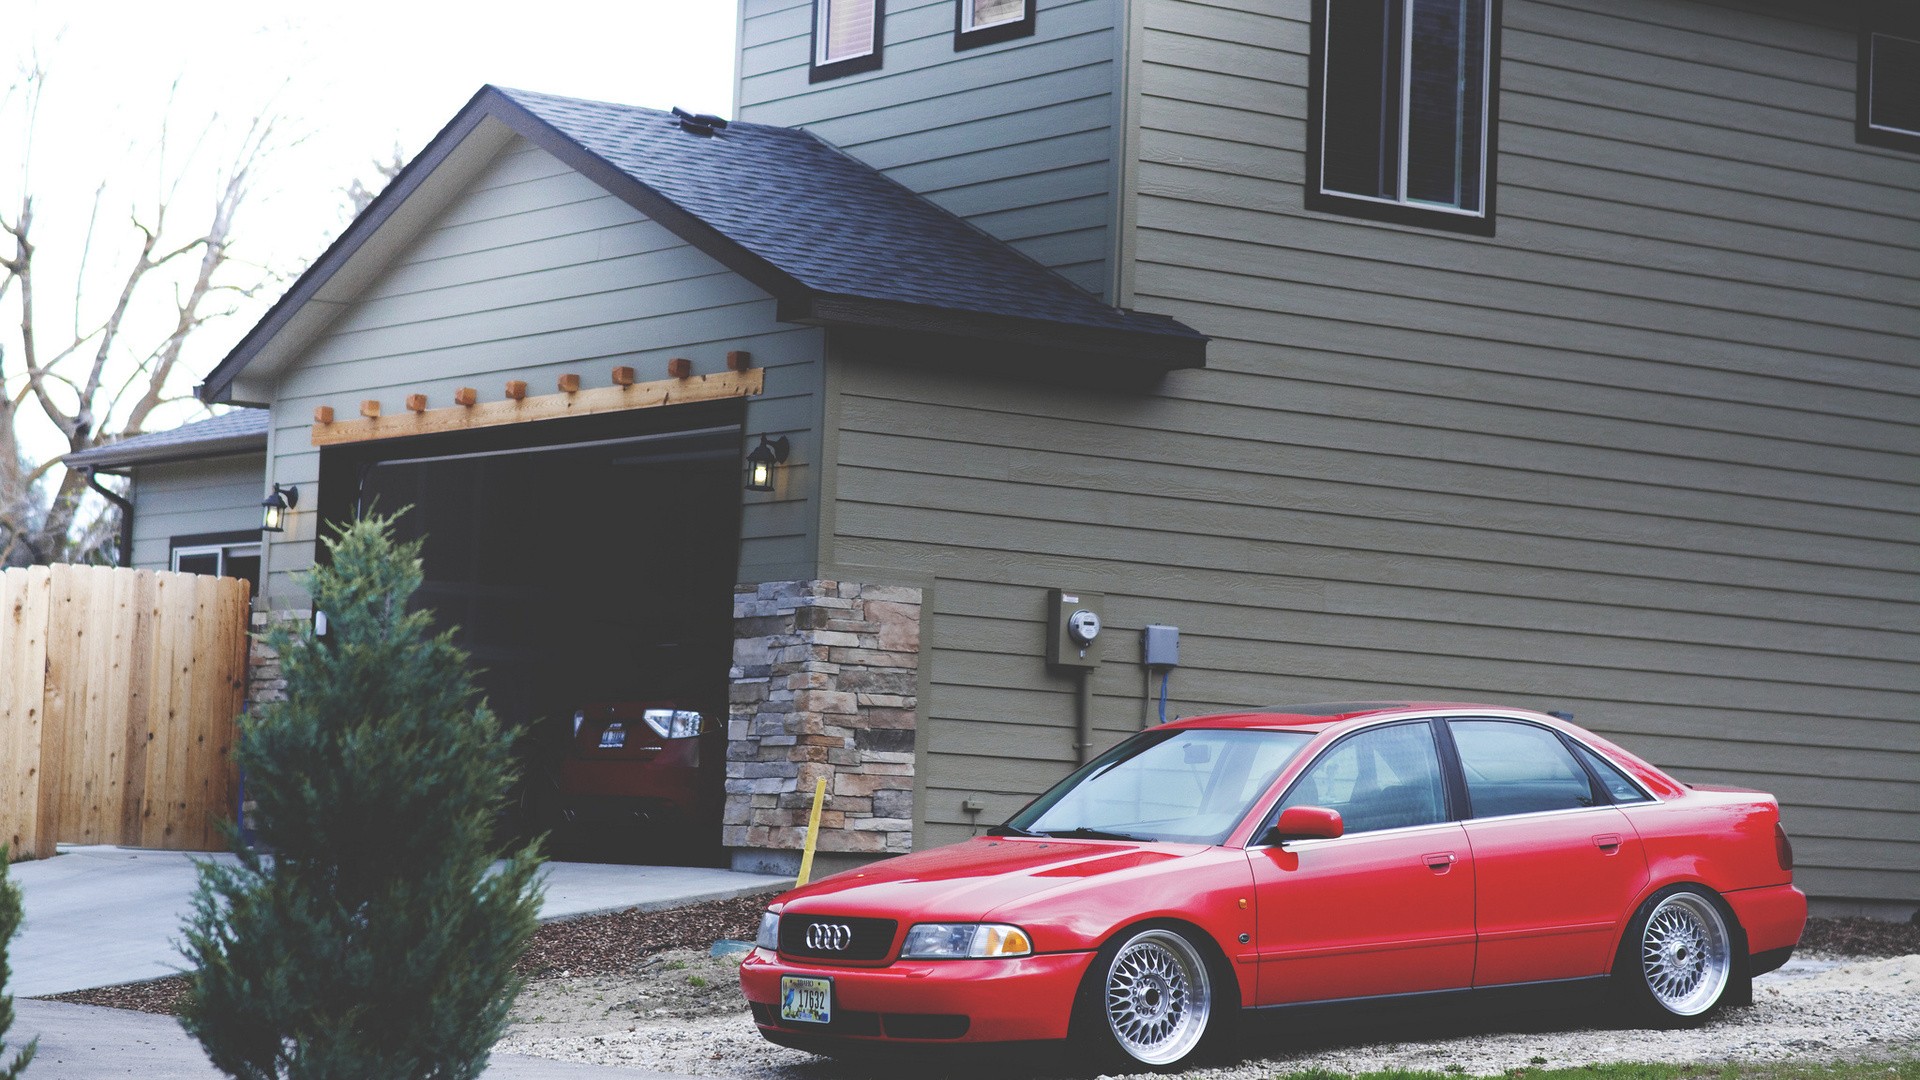 Audi A4, Audi S4, Car, Vehicle, House, Garages, Urban, Red cars Wallpaper